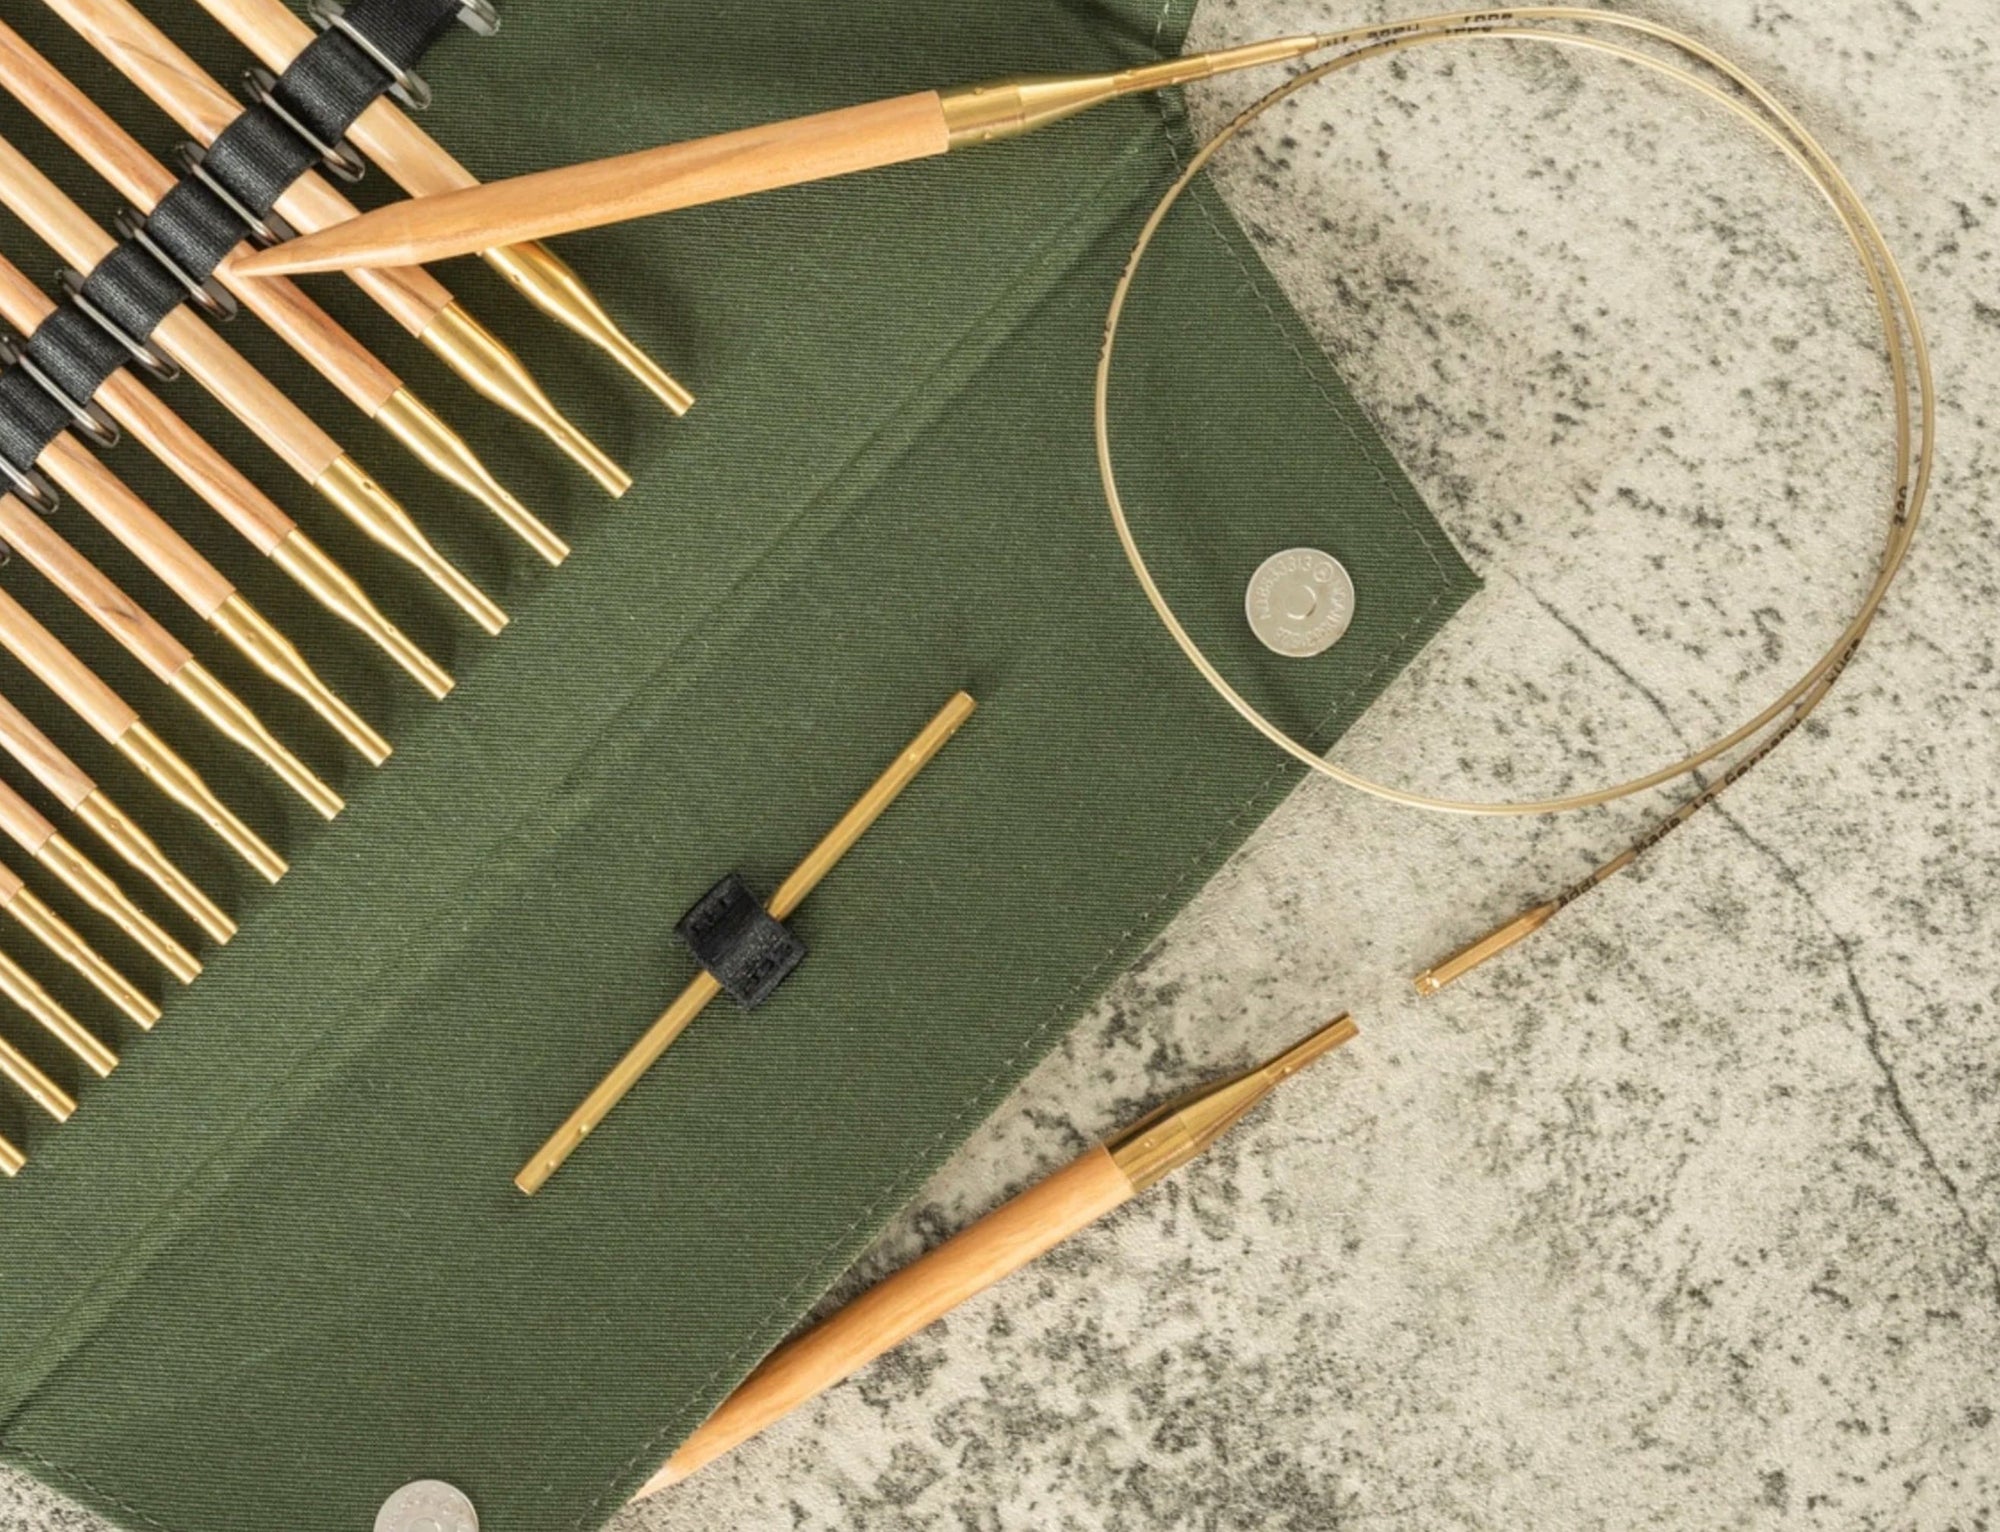 The Ultimate Fun-tastic Guide to Circular Knitting Needles